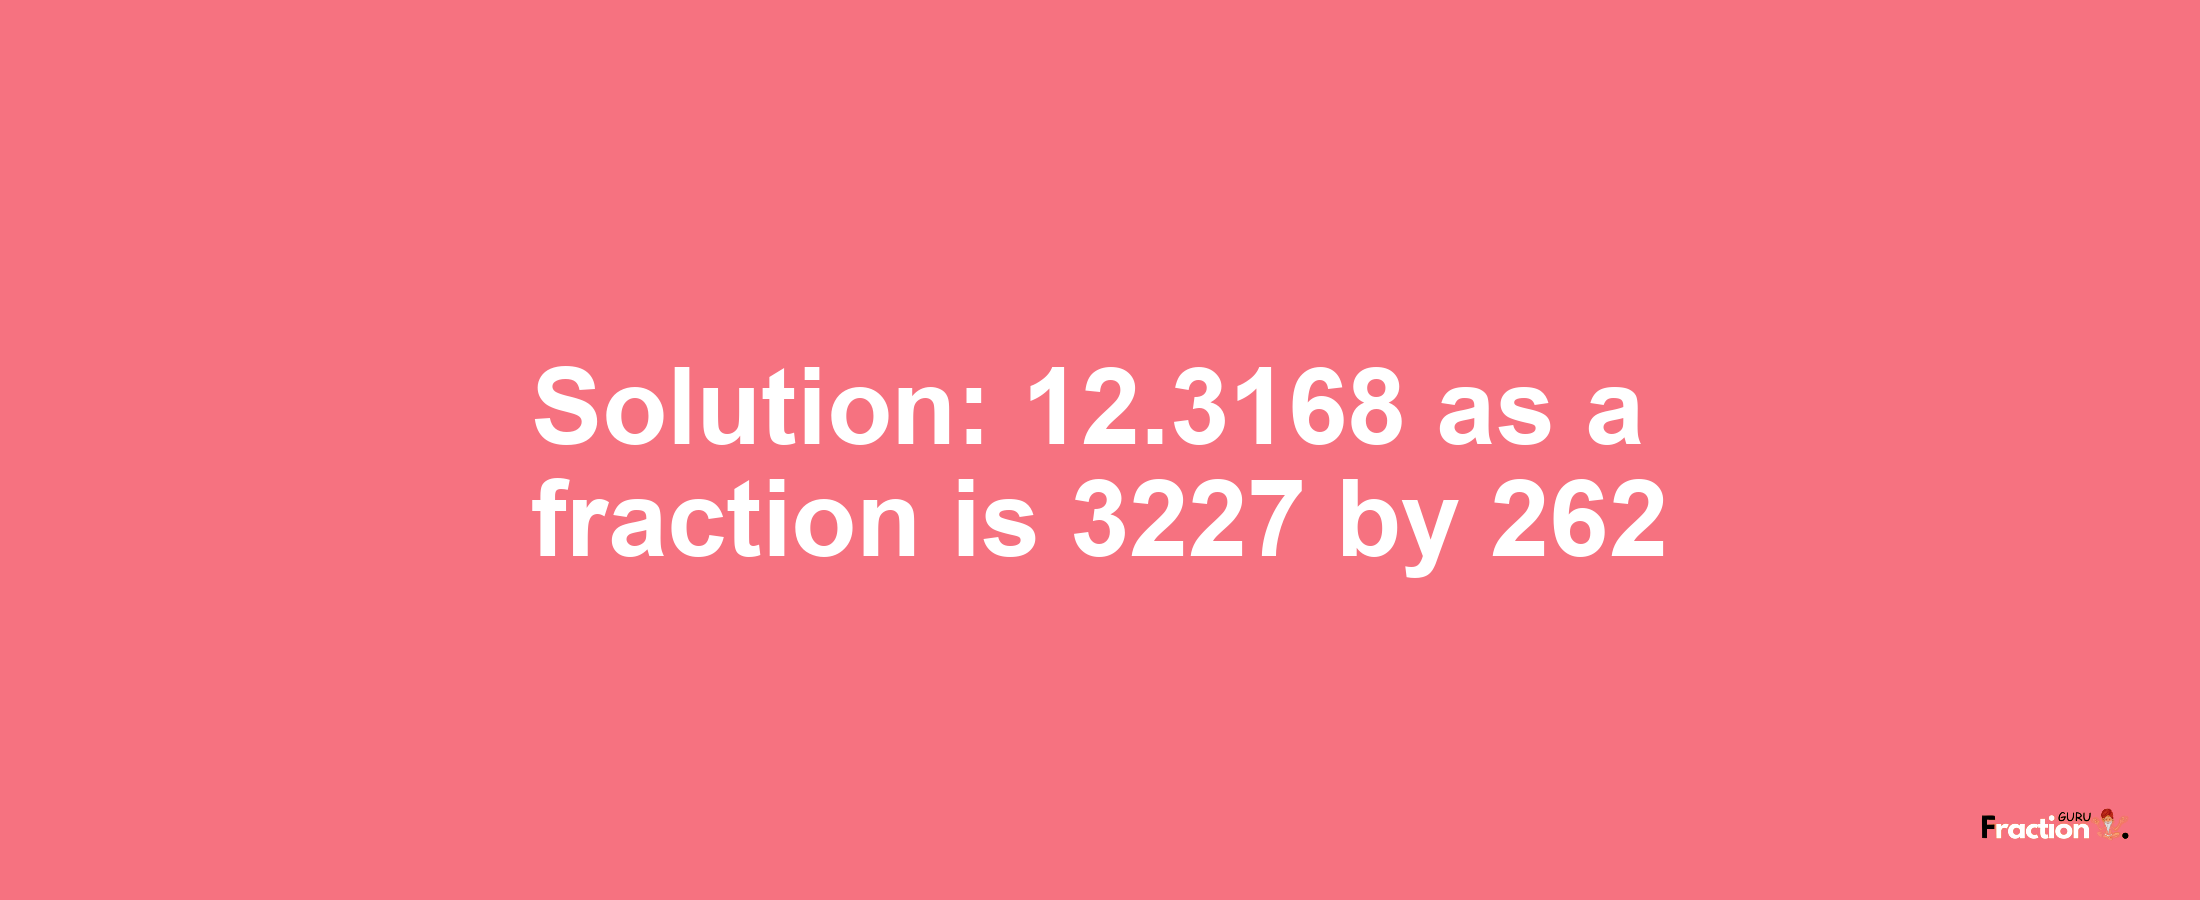 Solution:12.3168 as a fraction is 3227/262